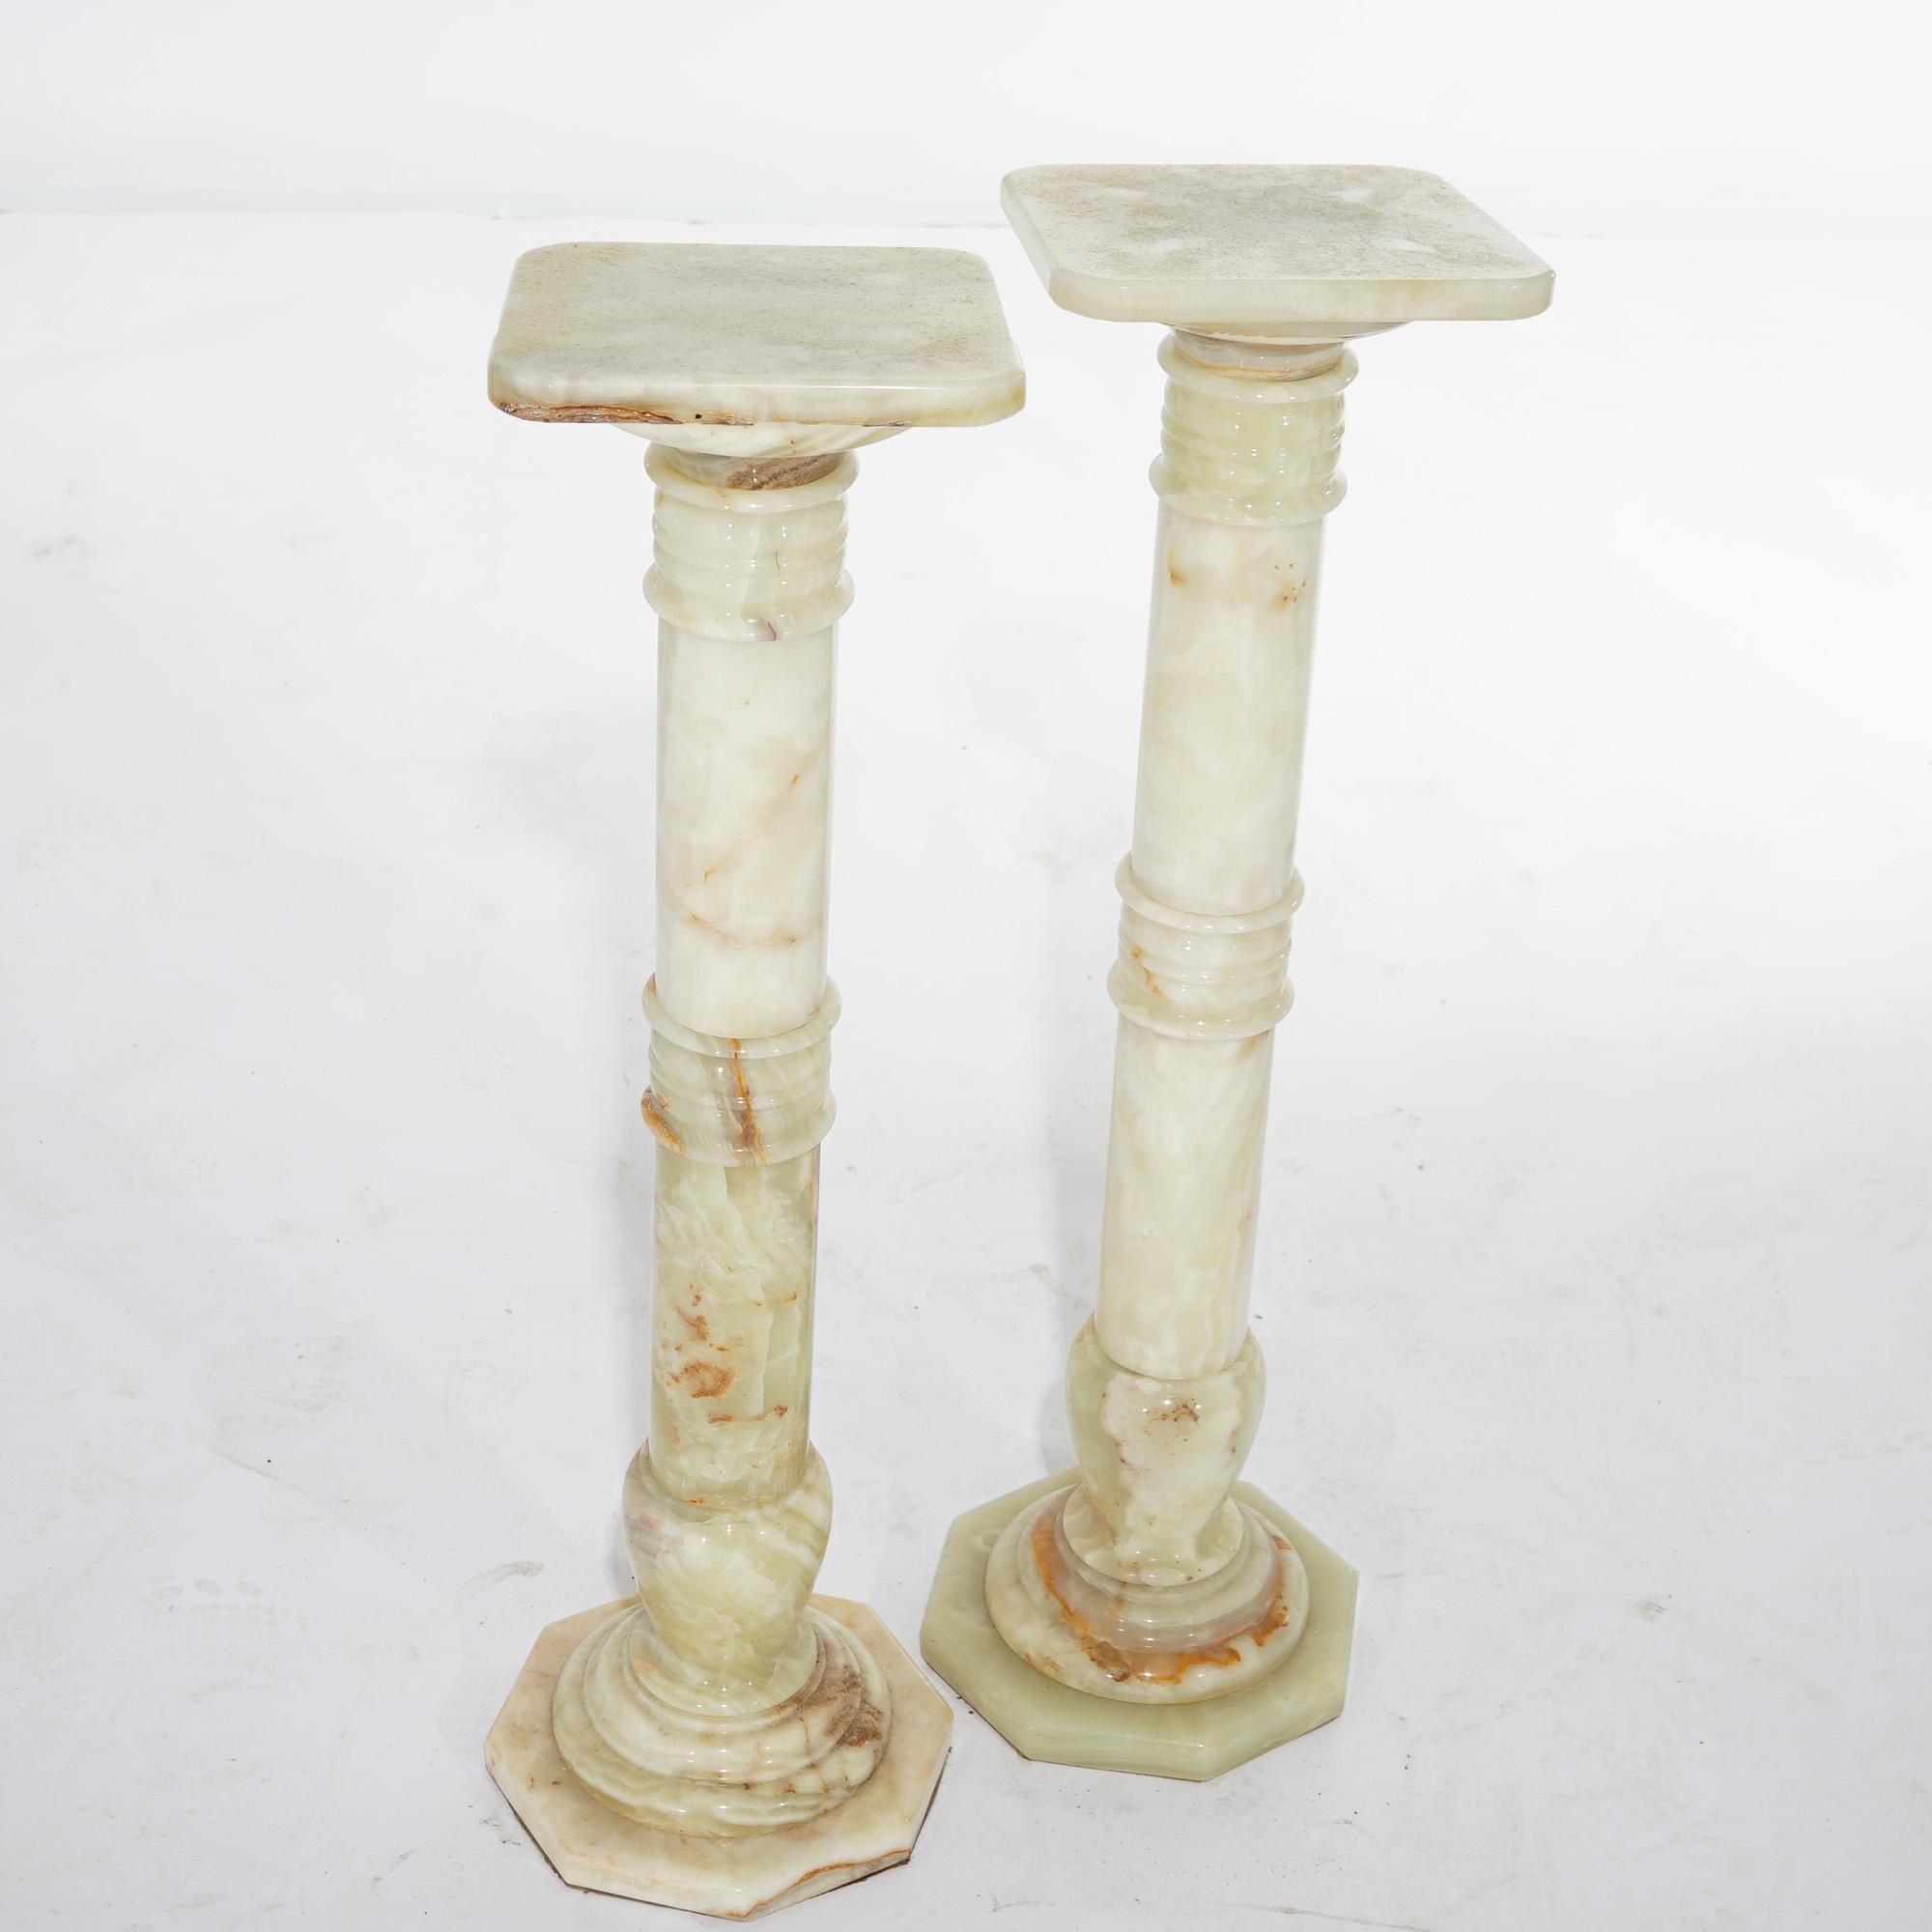 Antique Pair of Classical Carved Onyx Sculpture Display Pedestals Early 20th C For Sale 3